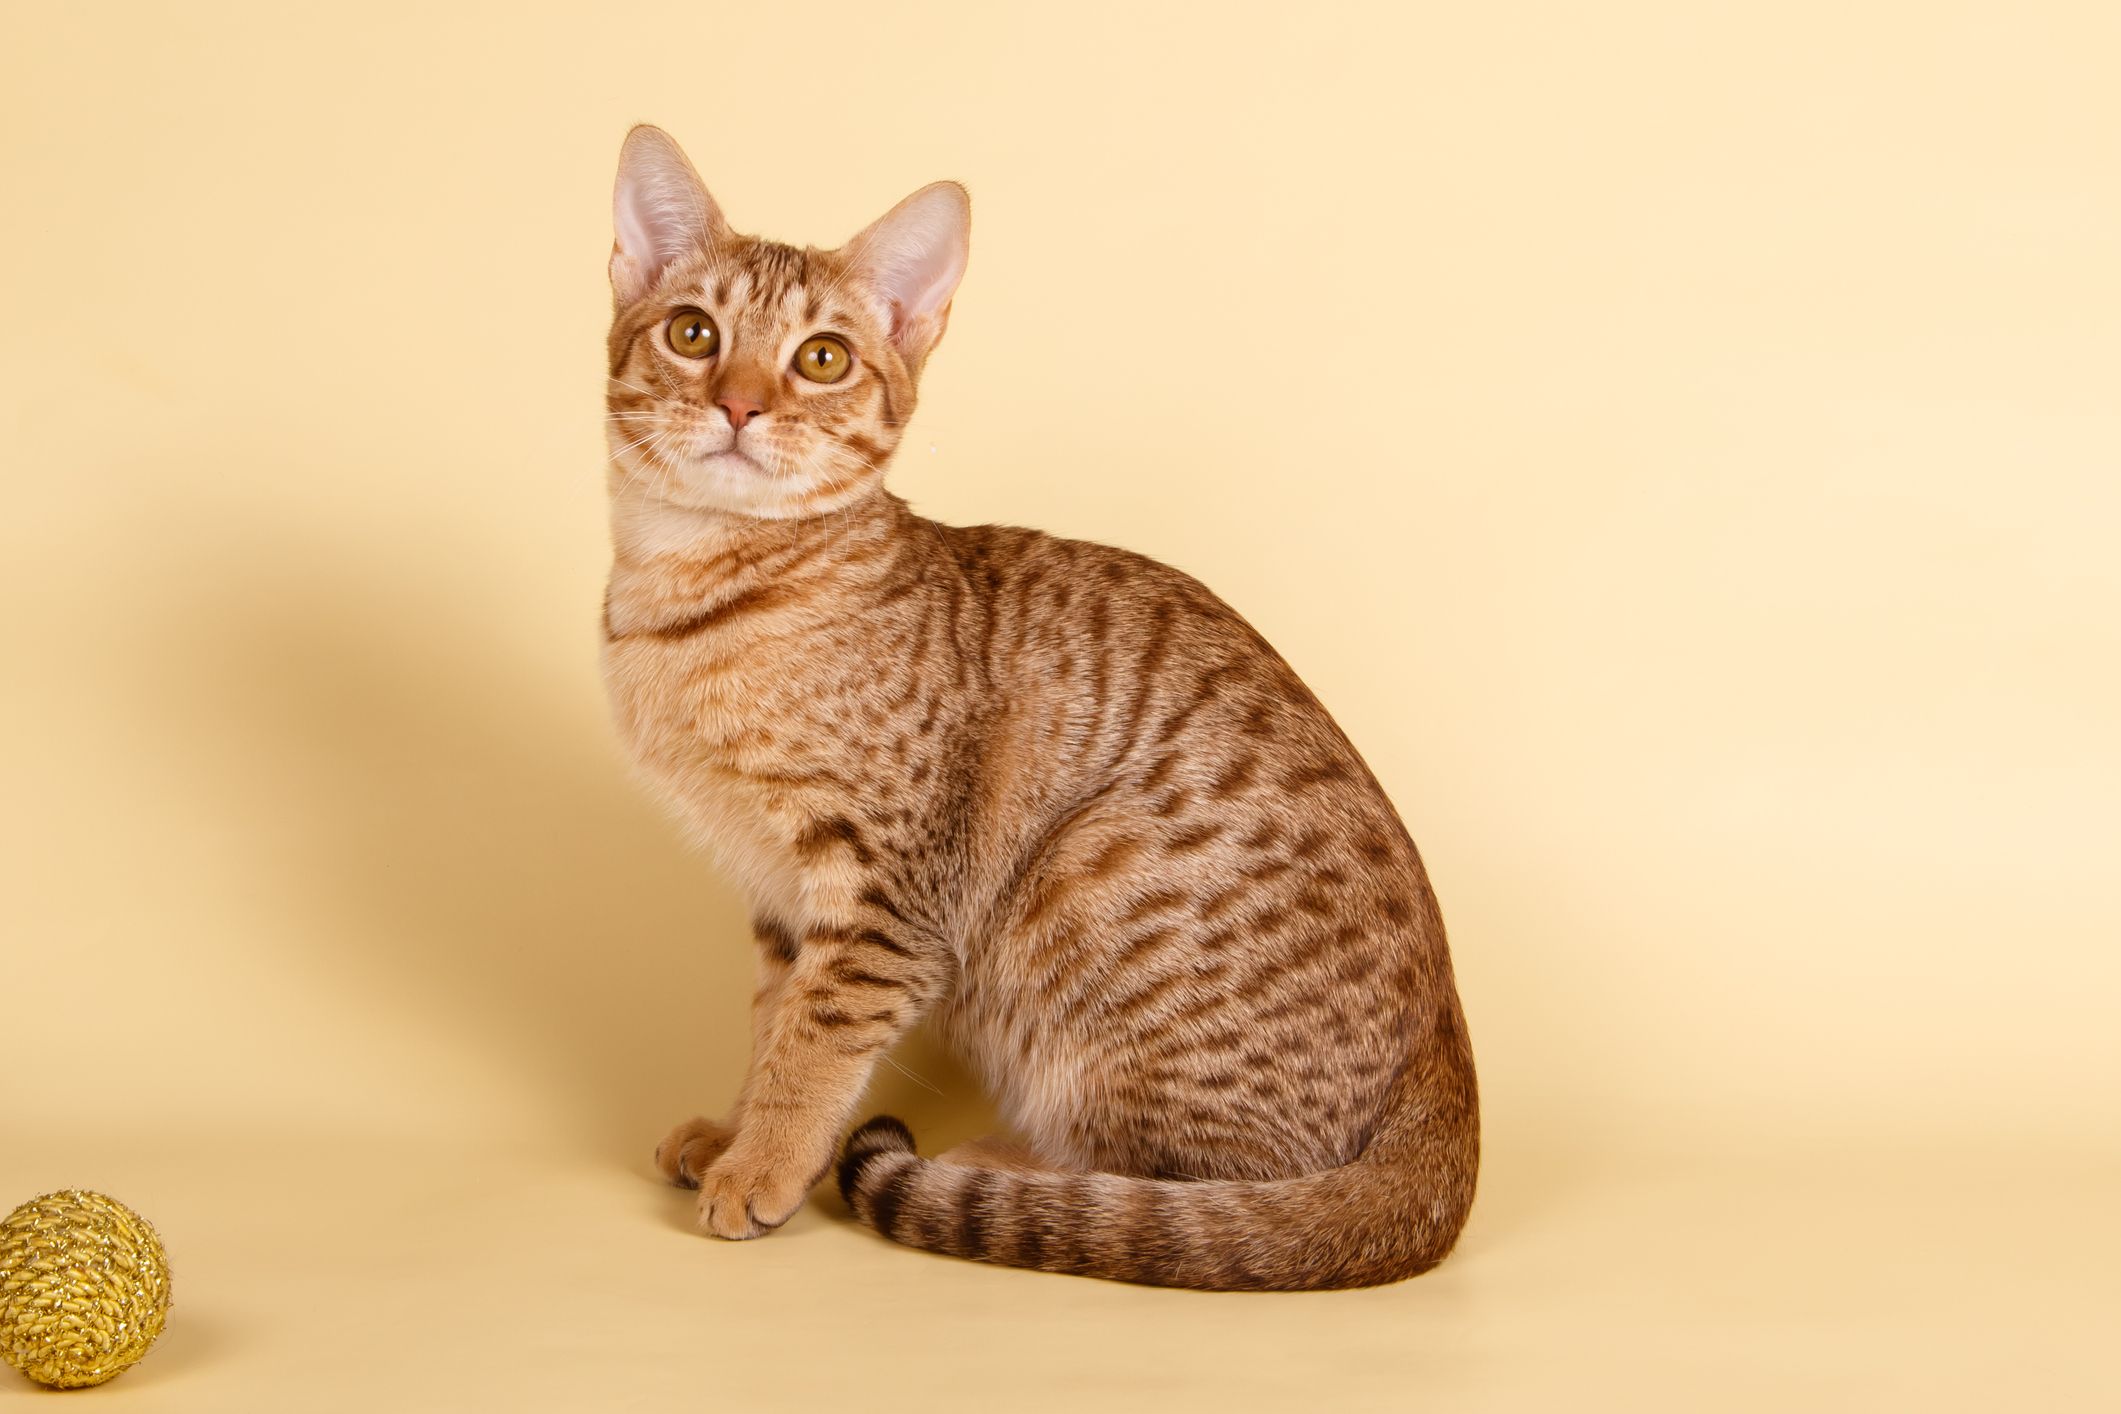 Cats That Look Like Tigers: Toyger Cat, Bengal Cat, and More